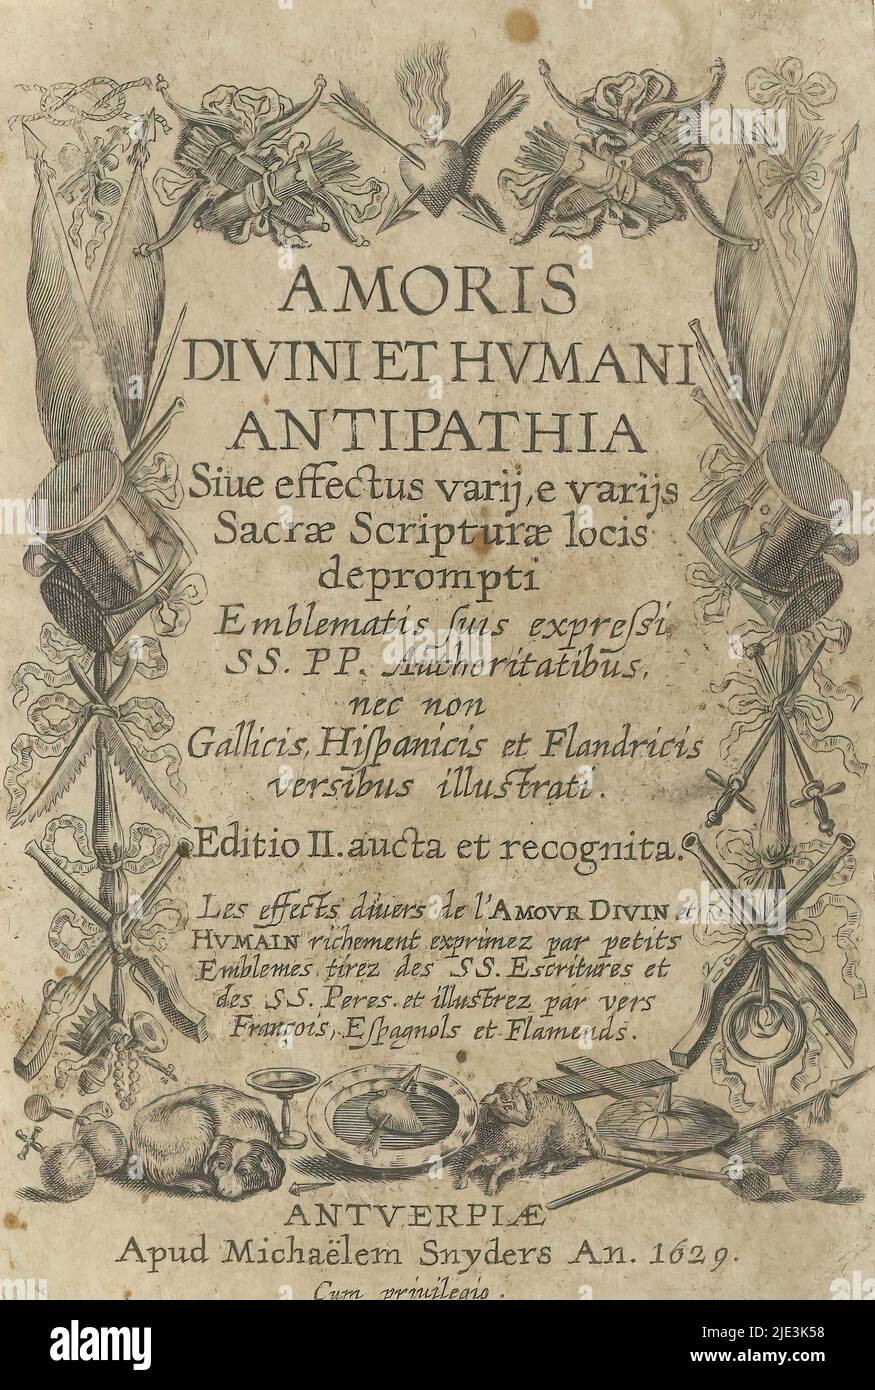 Arms trophies, Title page for: Ludovicus van Leuven, Amoris divini et humani antipathia, 1629, Framing arm trophies and at bottom a dog, a lamb and a bowl with a heart with an arrow., print maker: anonymous, publisher: Michael Snijders, (mentioned on object), anonymous, (mentioned on object), Antwerp, 1629, paper, engraving, height 101 mm × width 69 mm Stock Photo